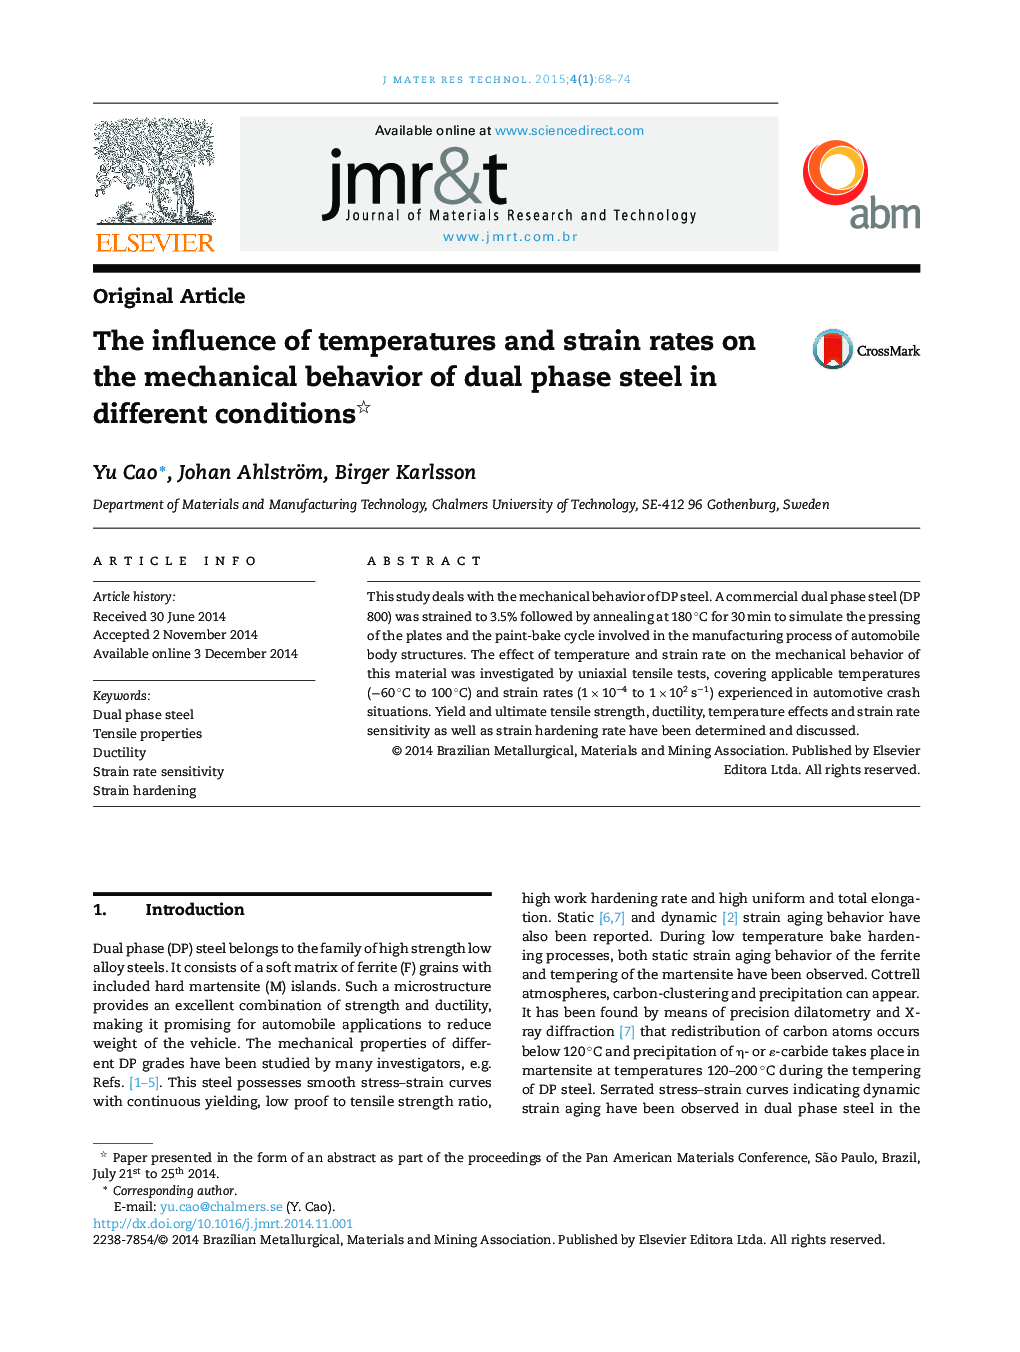 The influence of temperatures and strain rates on the mechanical behavior of dual phase steel in different conditions 